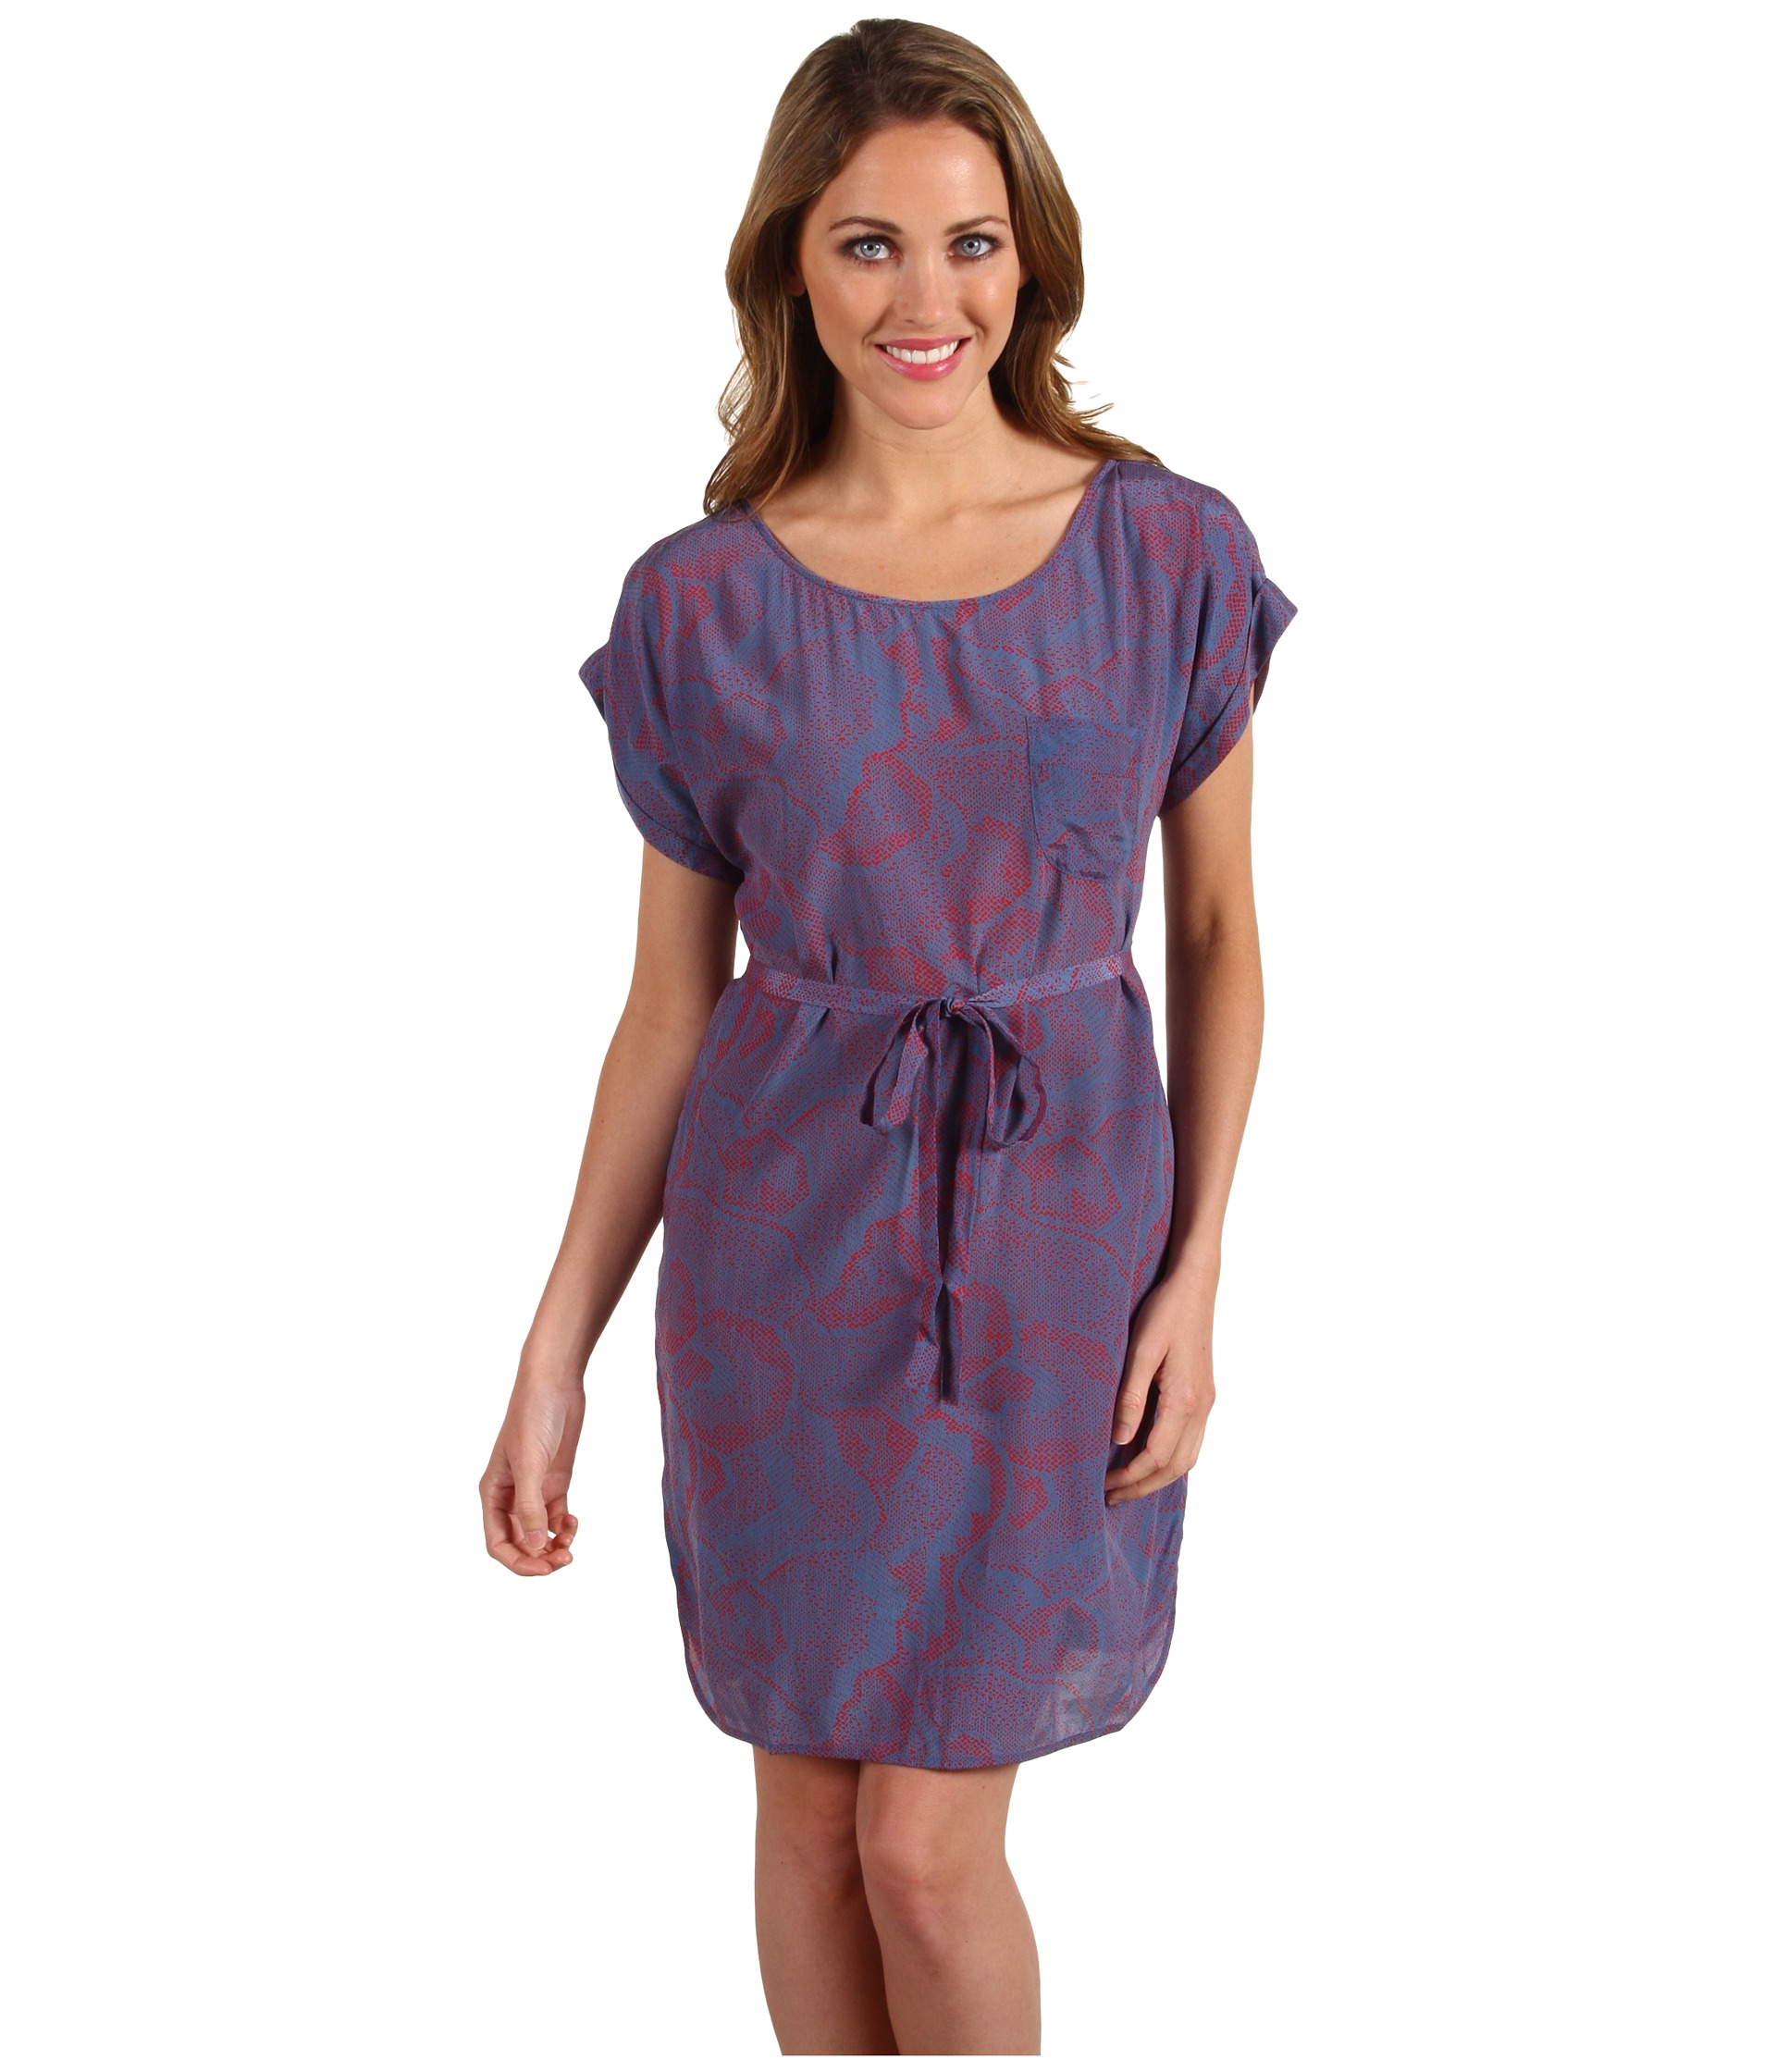 French Connection Sand Dune Dress $85.99 ( 42% off MSRP $148.00)